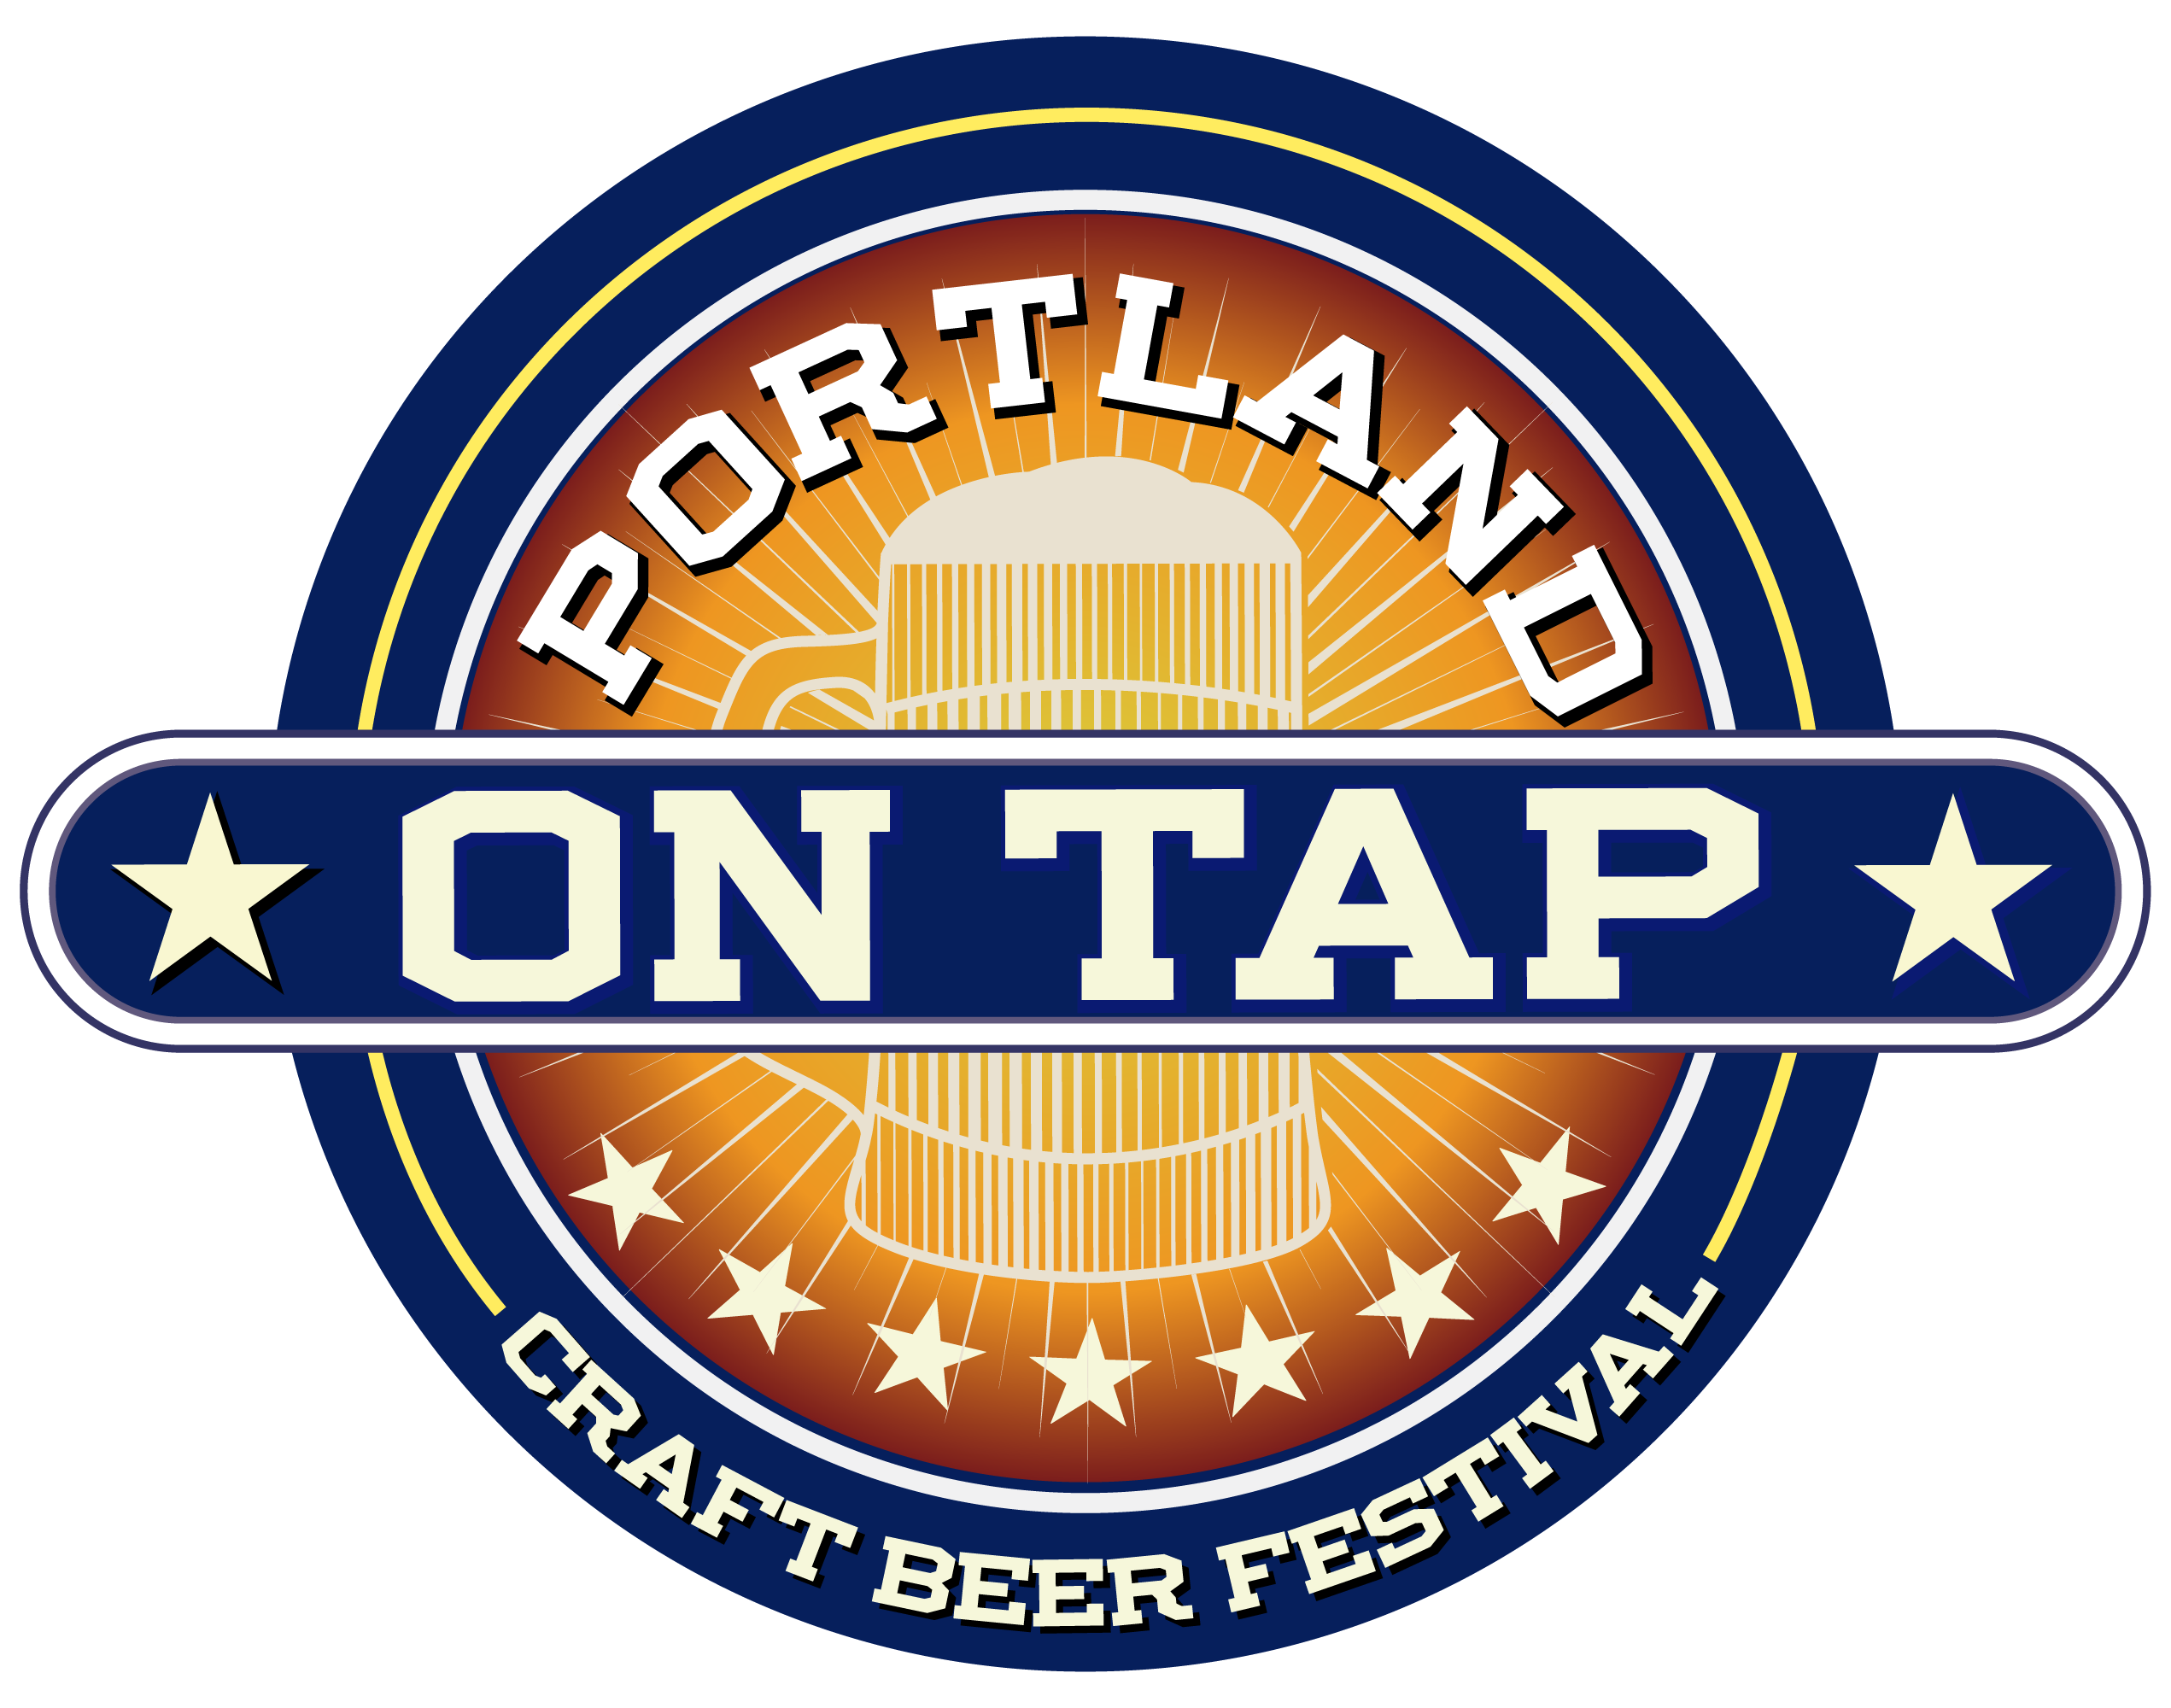 Portland On Tap at Cross Insurance Arena